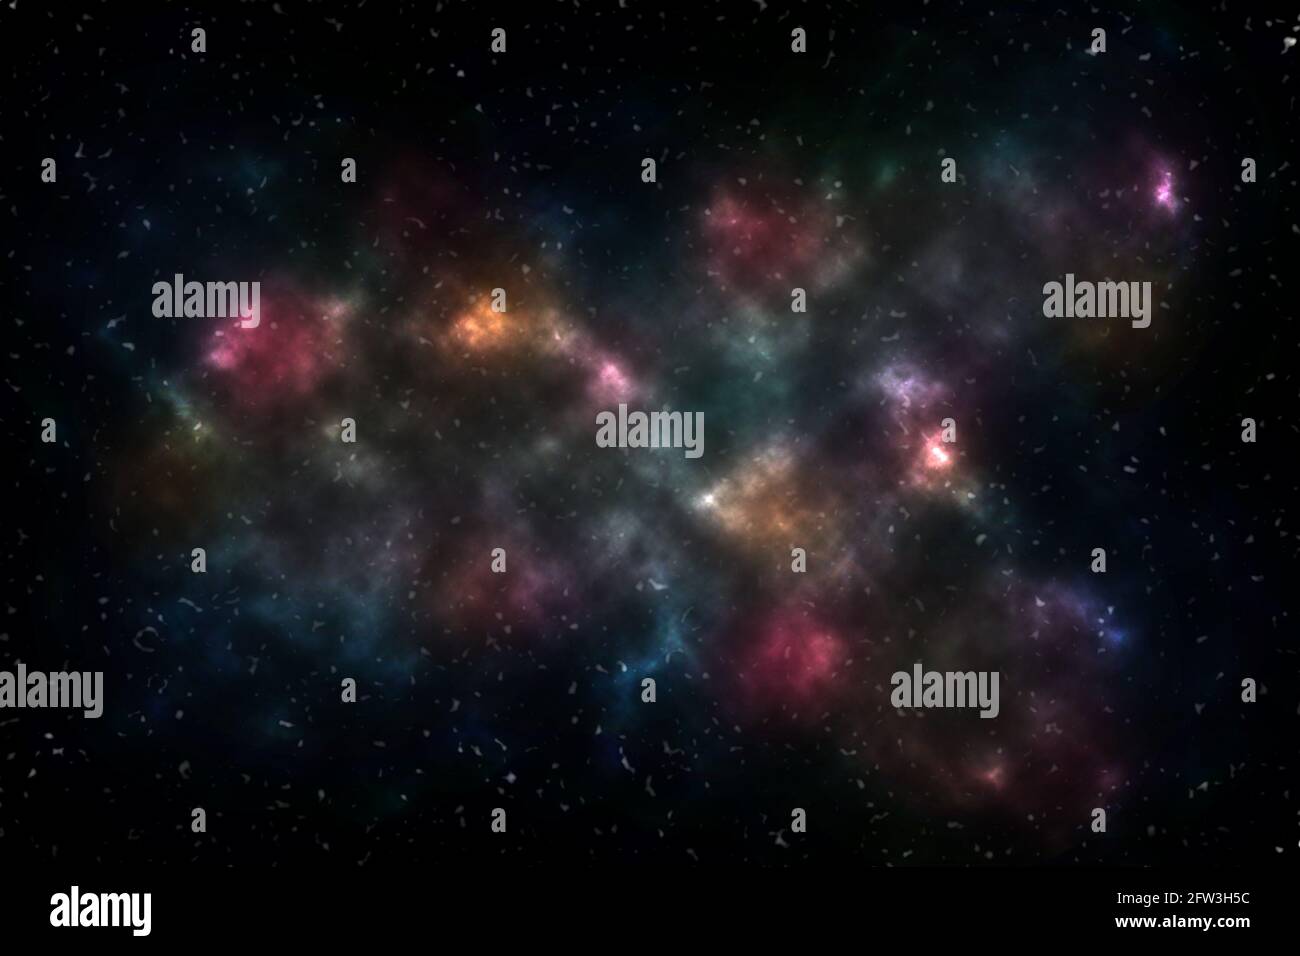 Colorful space background with nebula and stars. Environment 360 HDRI map. Equirectangular projection, spherical panorama. 3d illustration. Colorful o Stock Photo